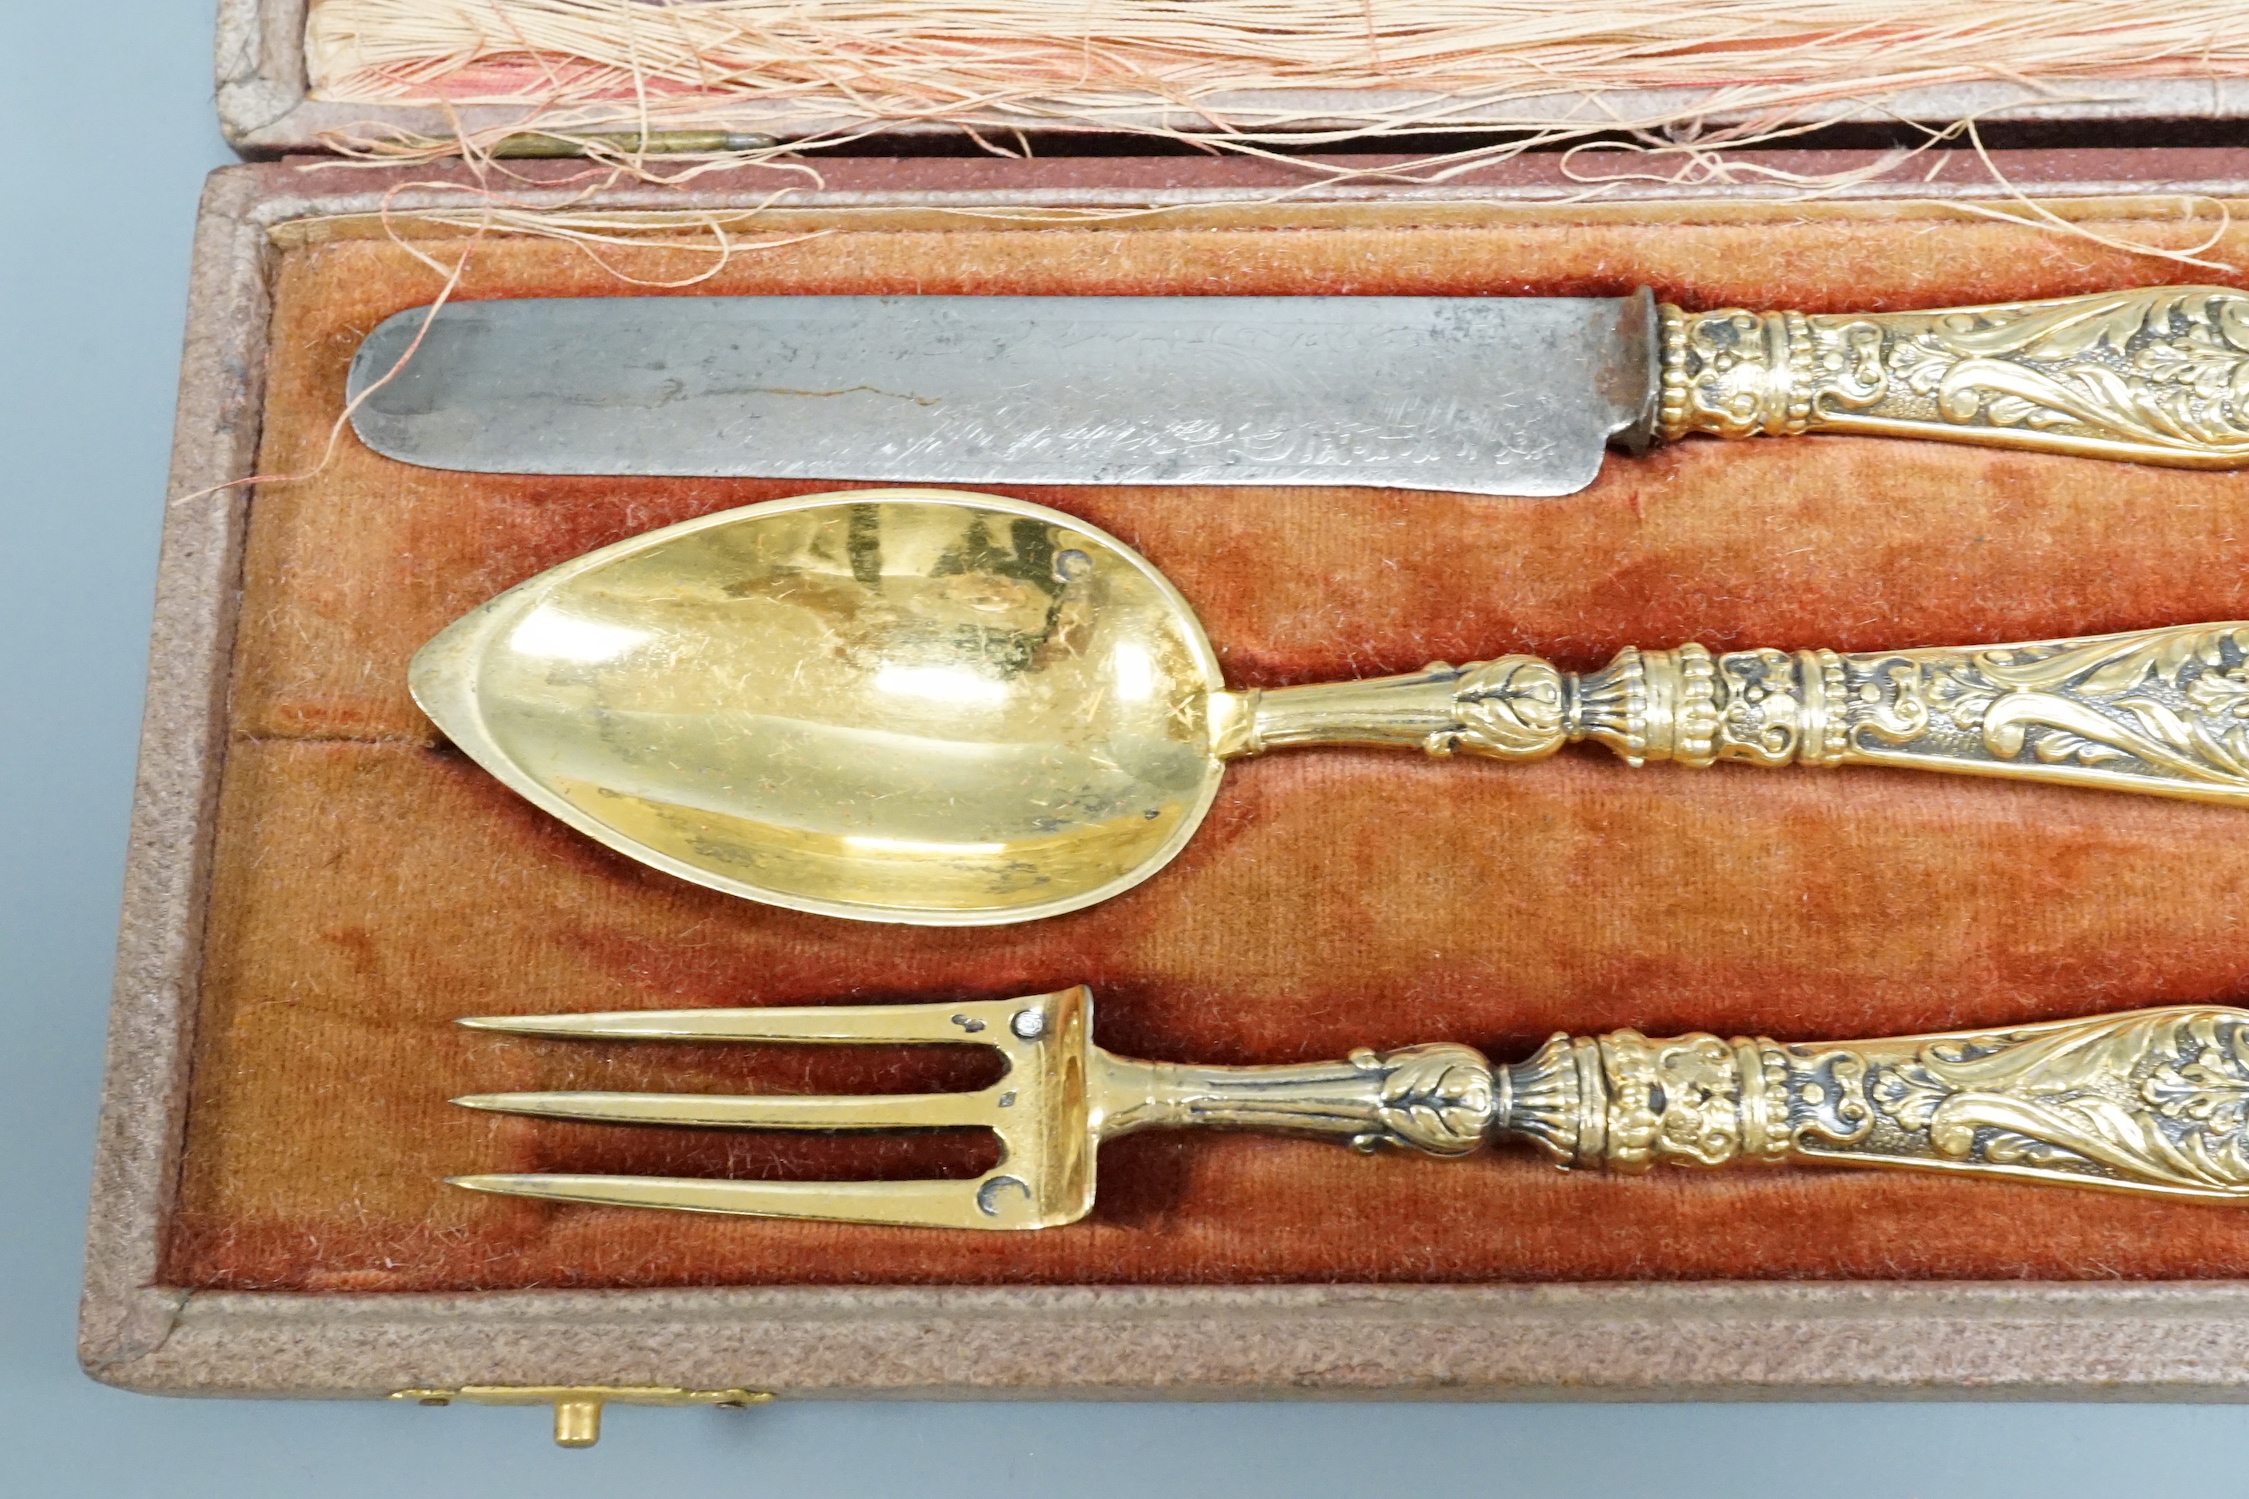 A leather cased early 19th century gilt white metal three piece cutlery set, knife 18.1cm.